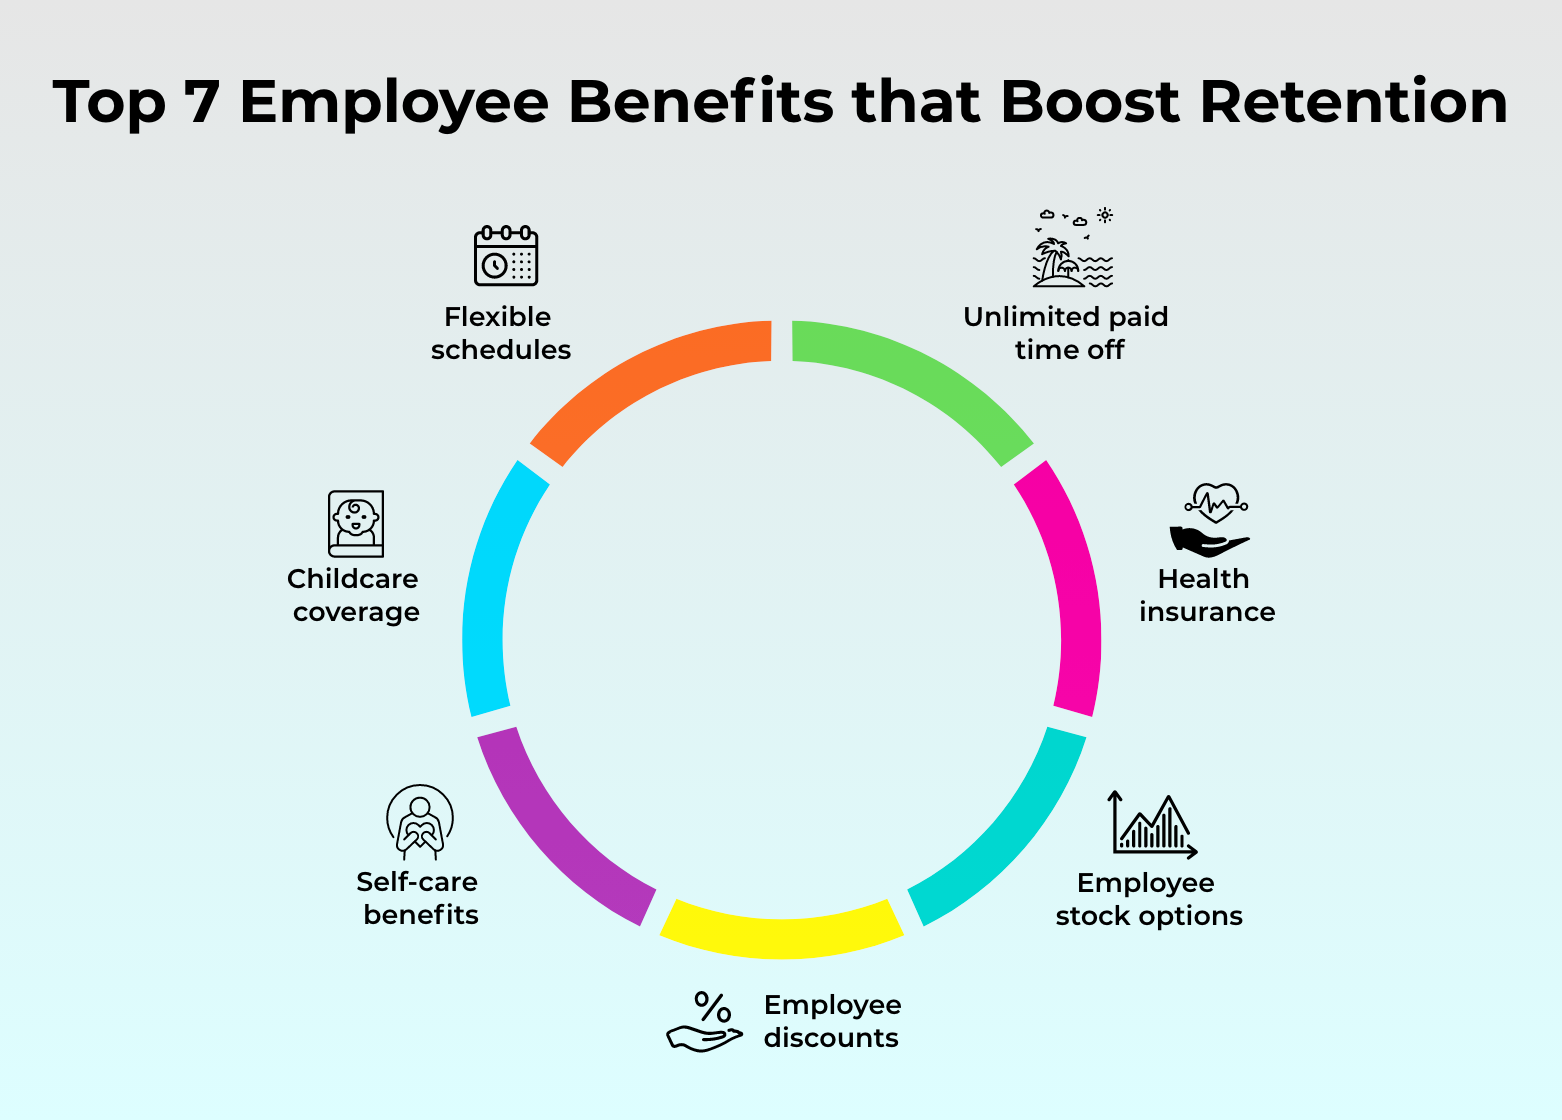 These are the top employee benefits that boost retention.